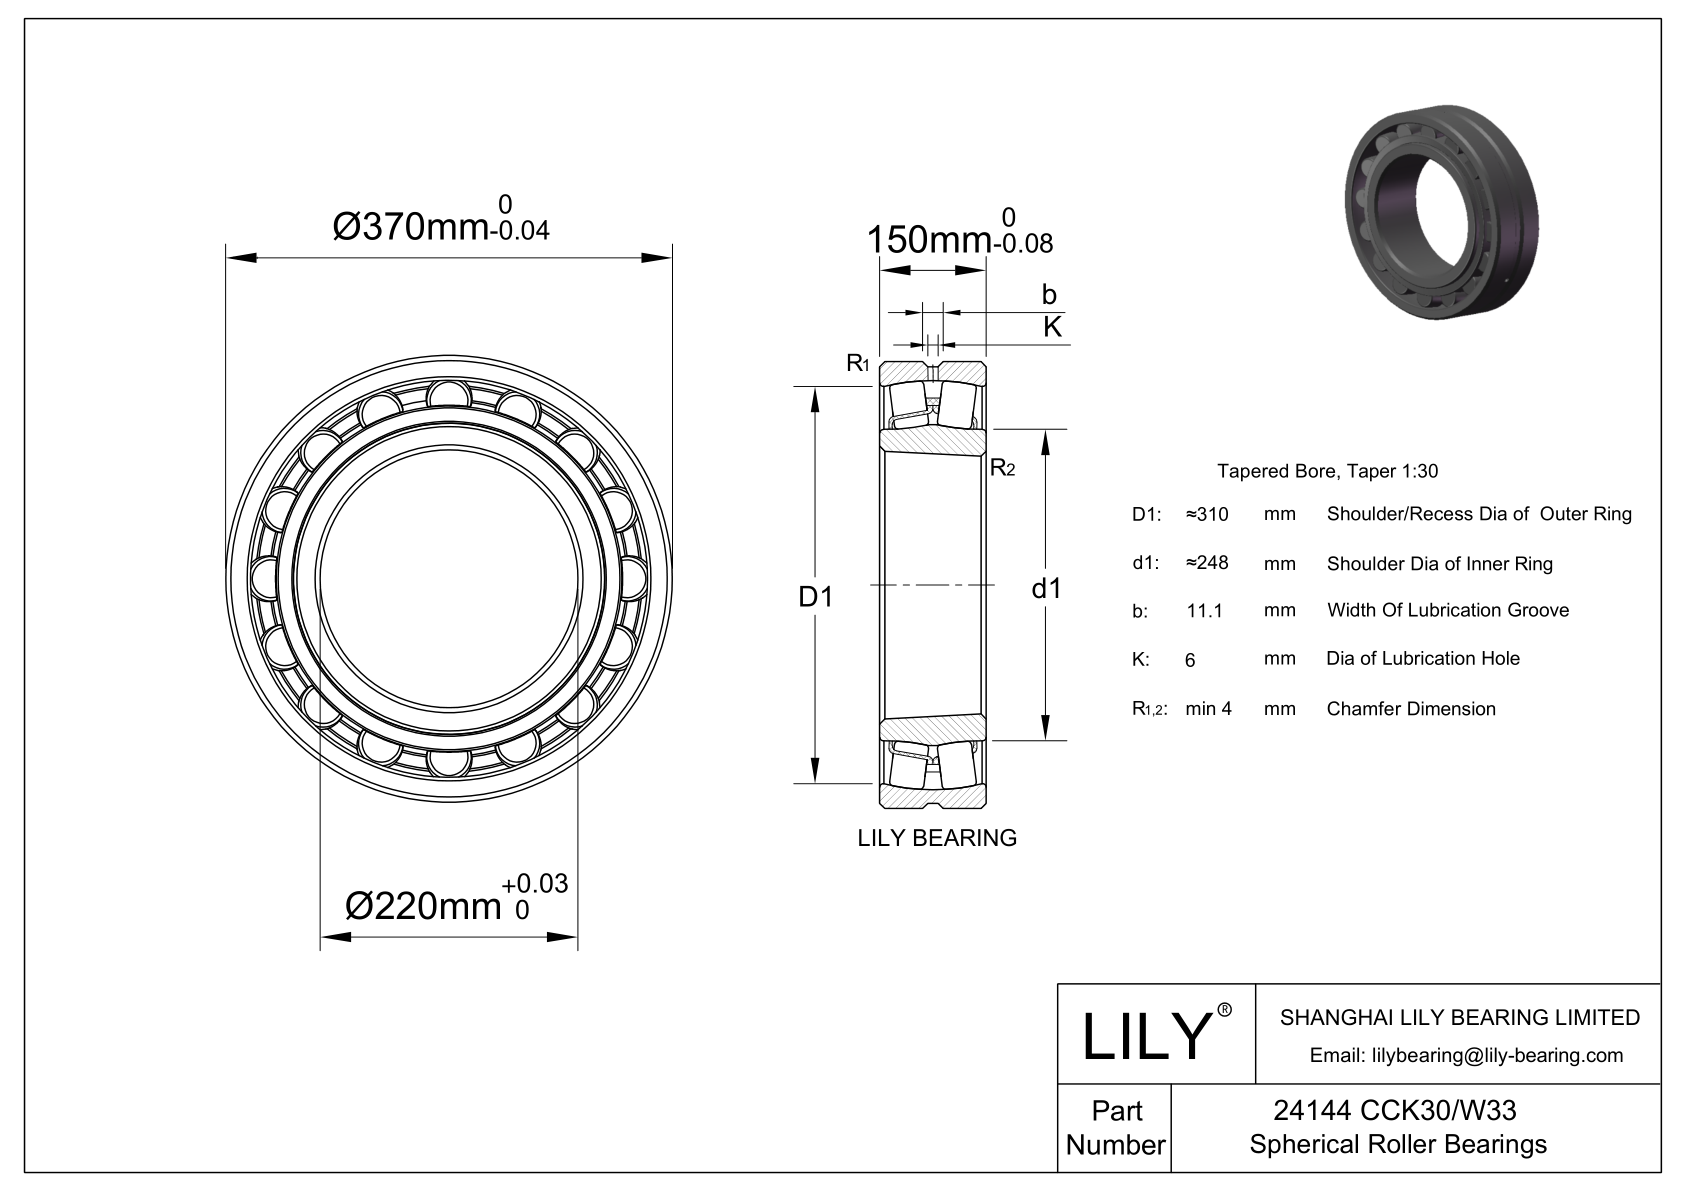 24144 CCK30/W33 Double Row Spherical Roller Bearing cad drawing